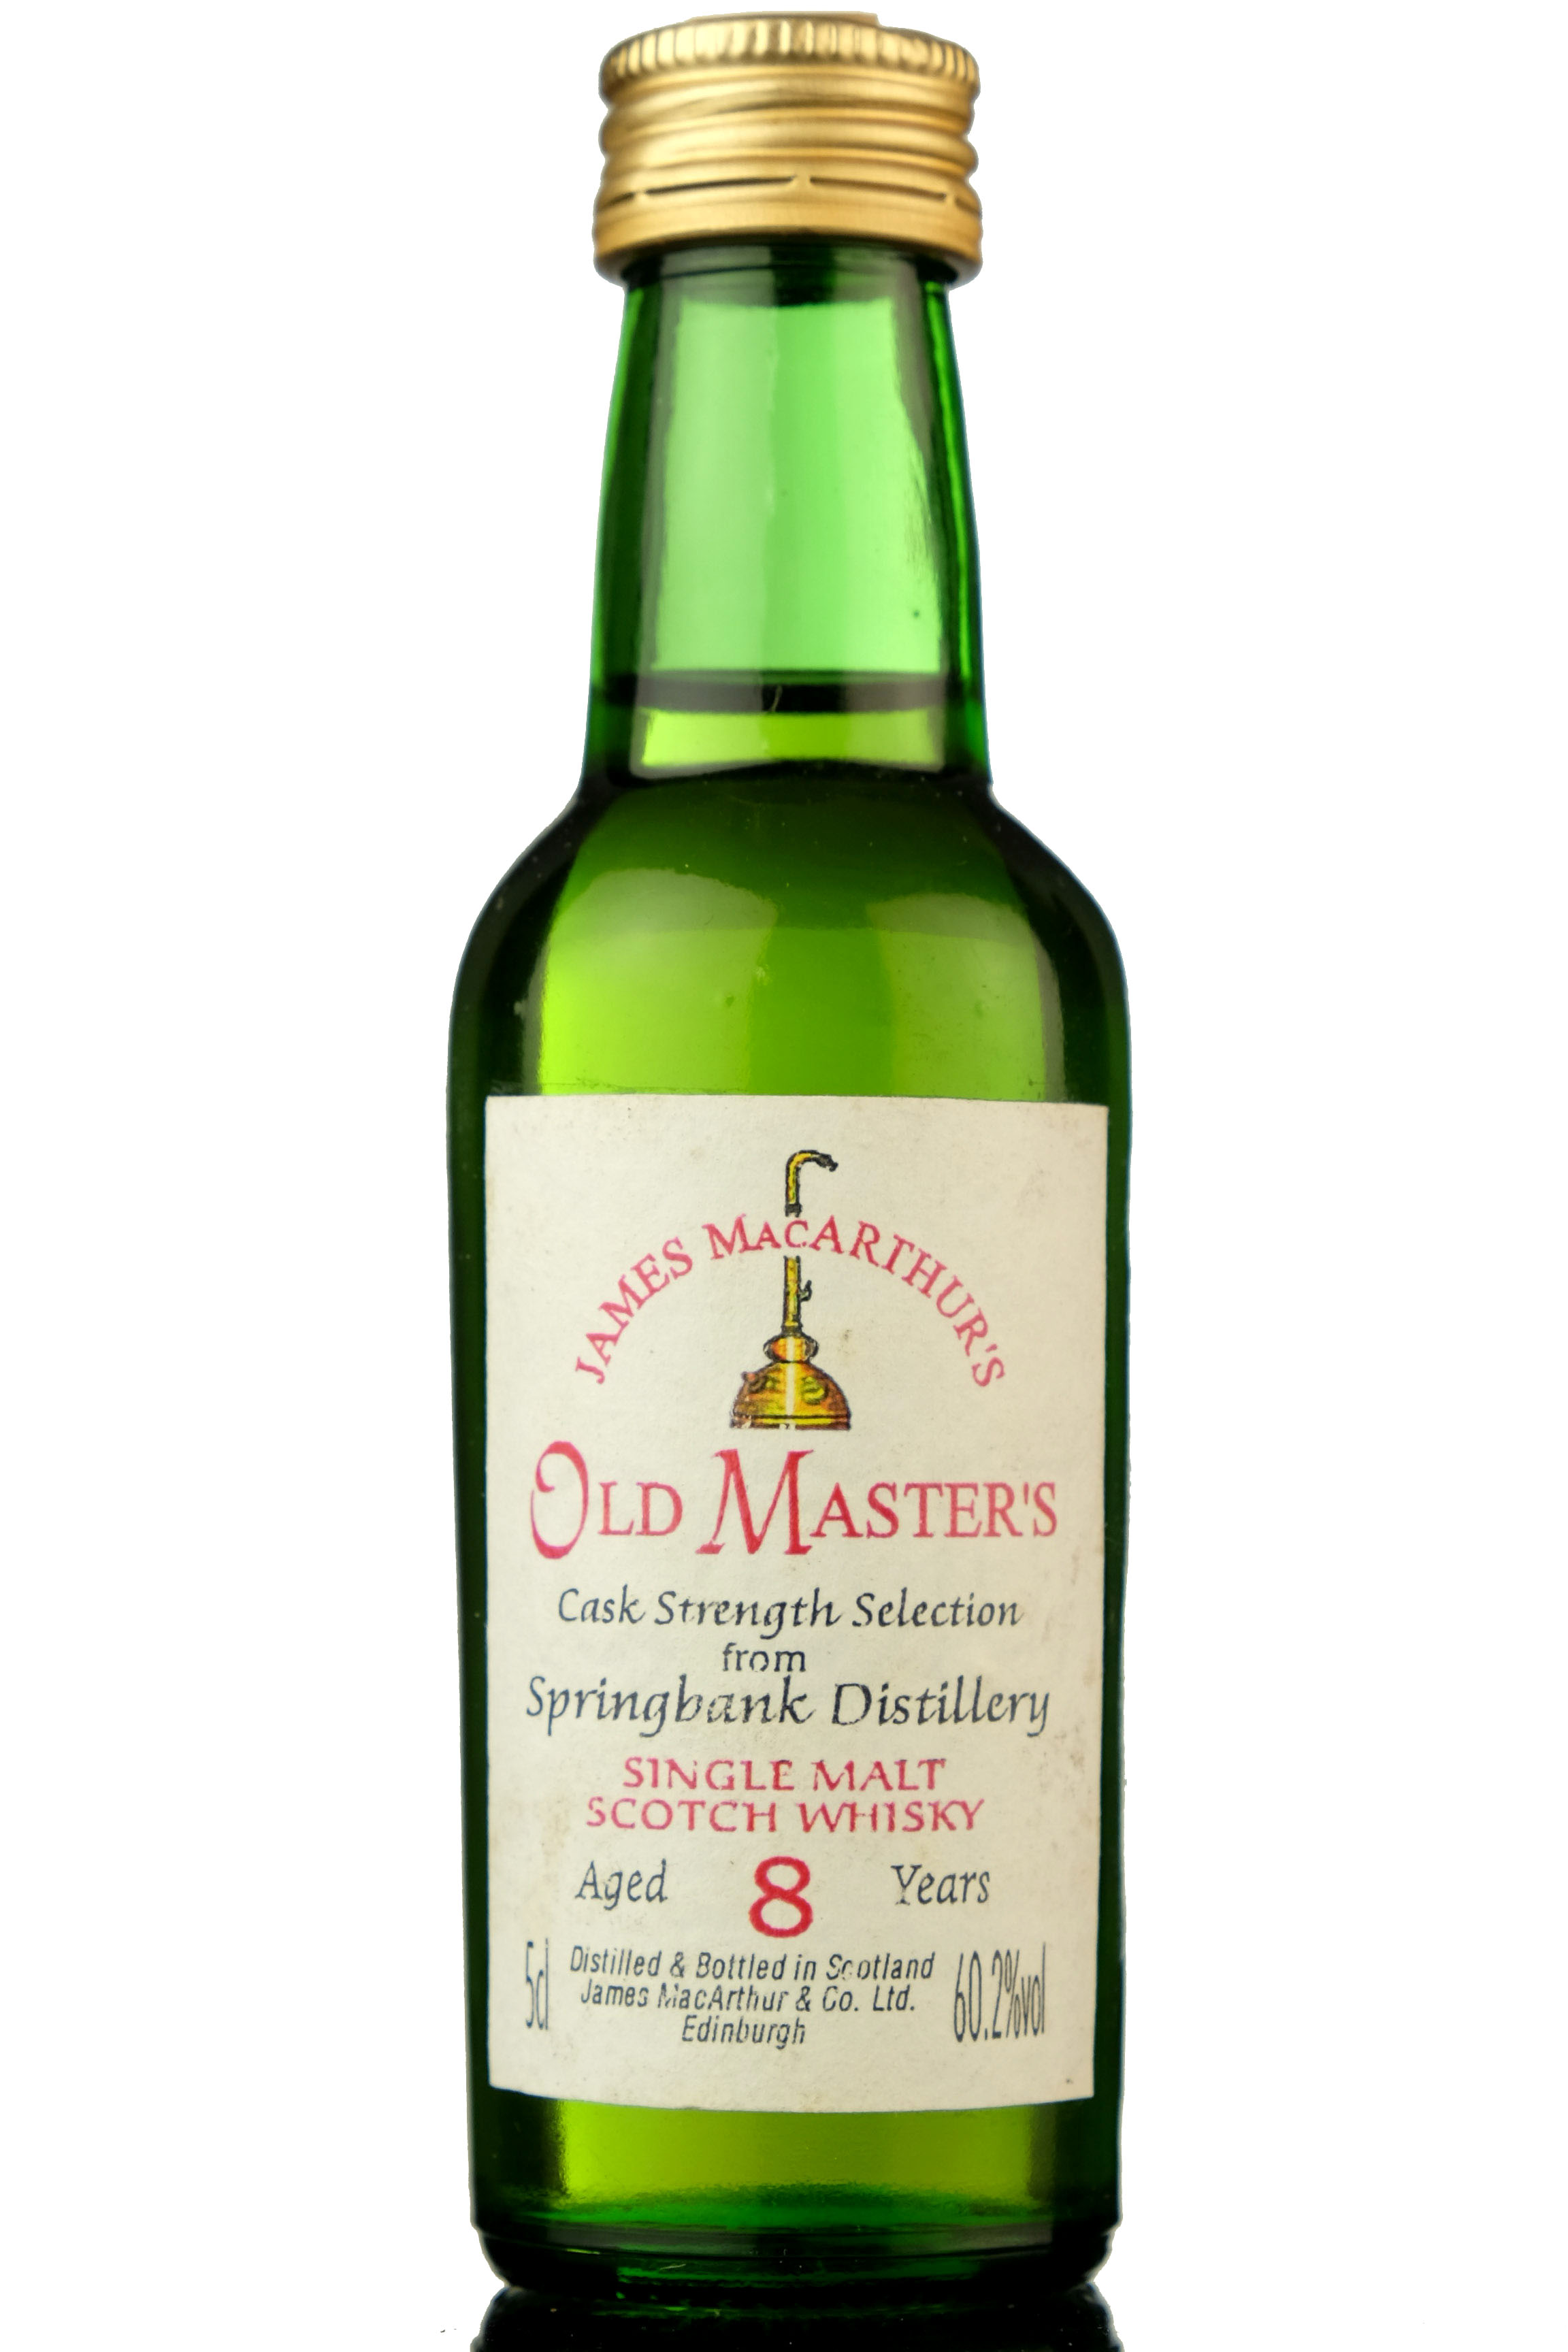 Springbank 8 Year Old - James MacArthur - Old Masters Miniature